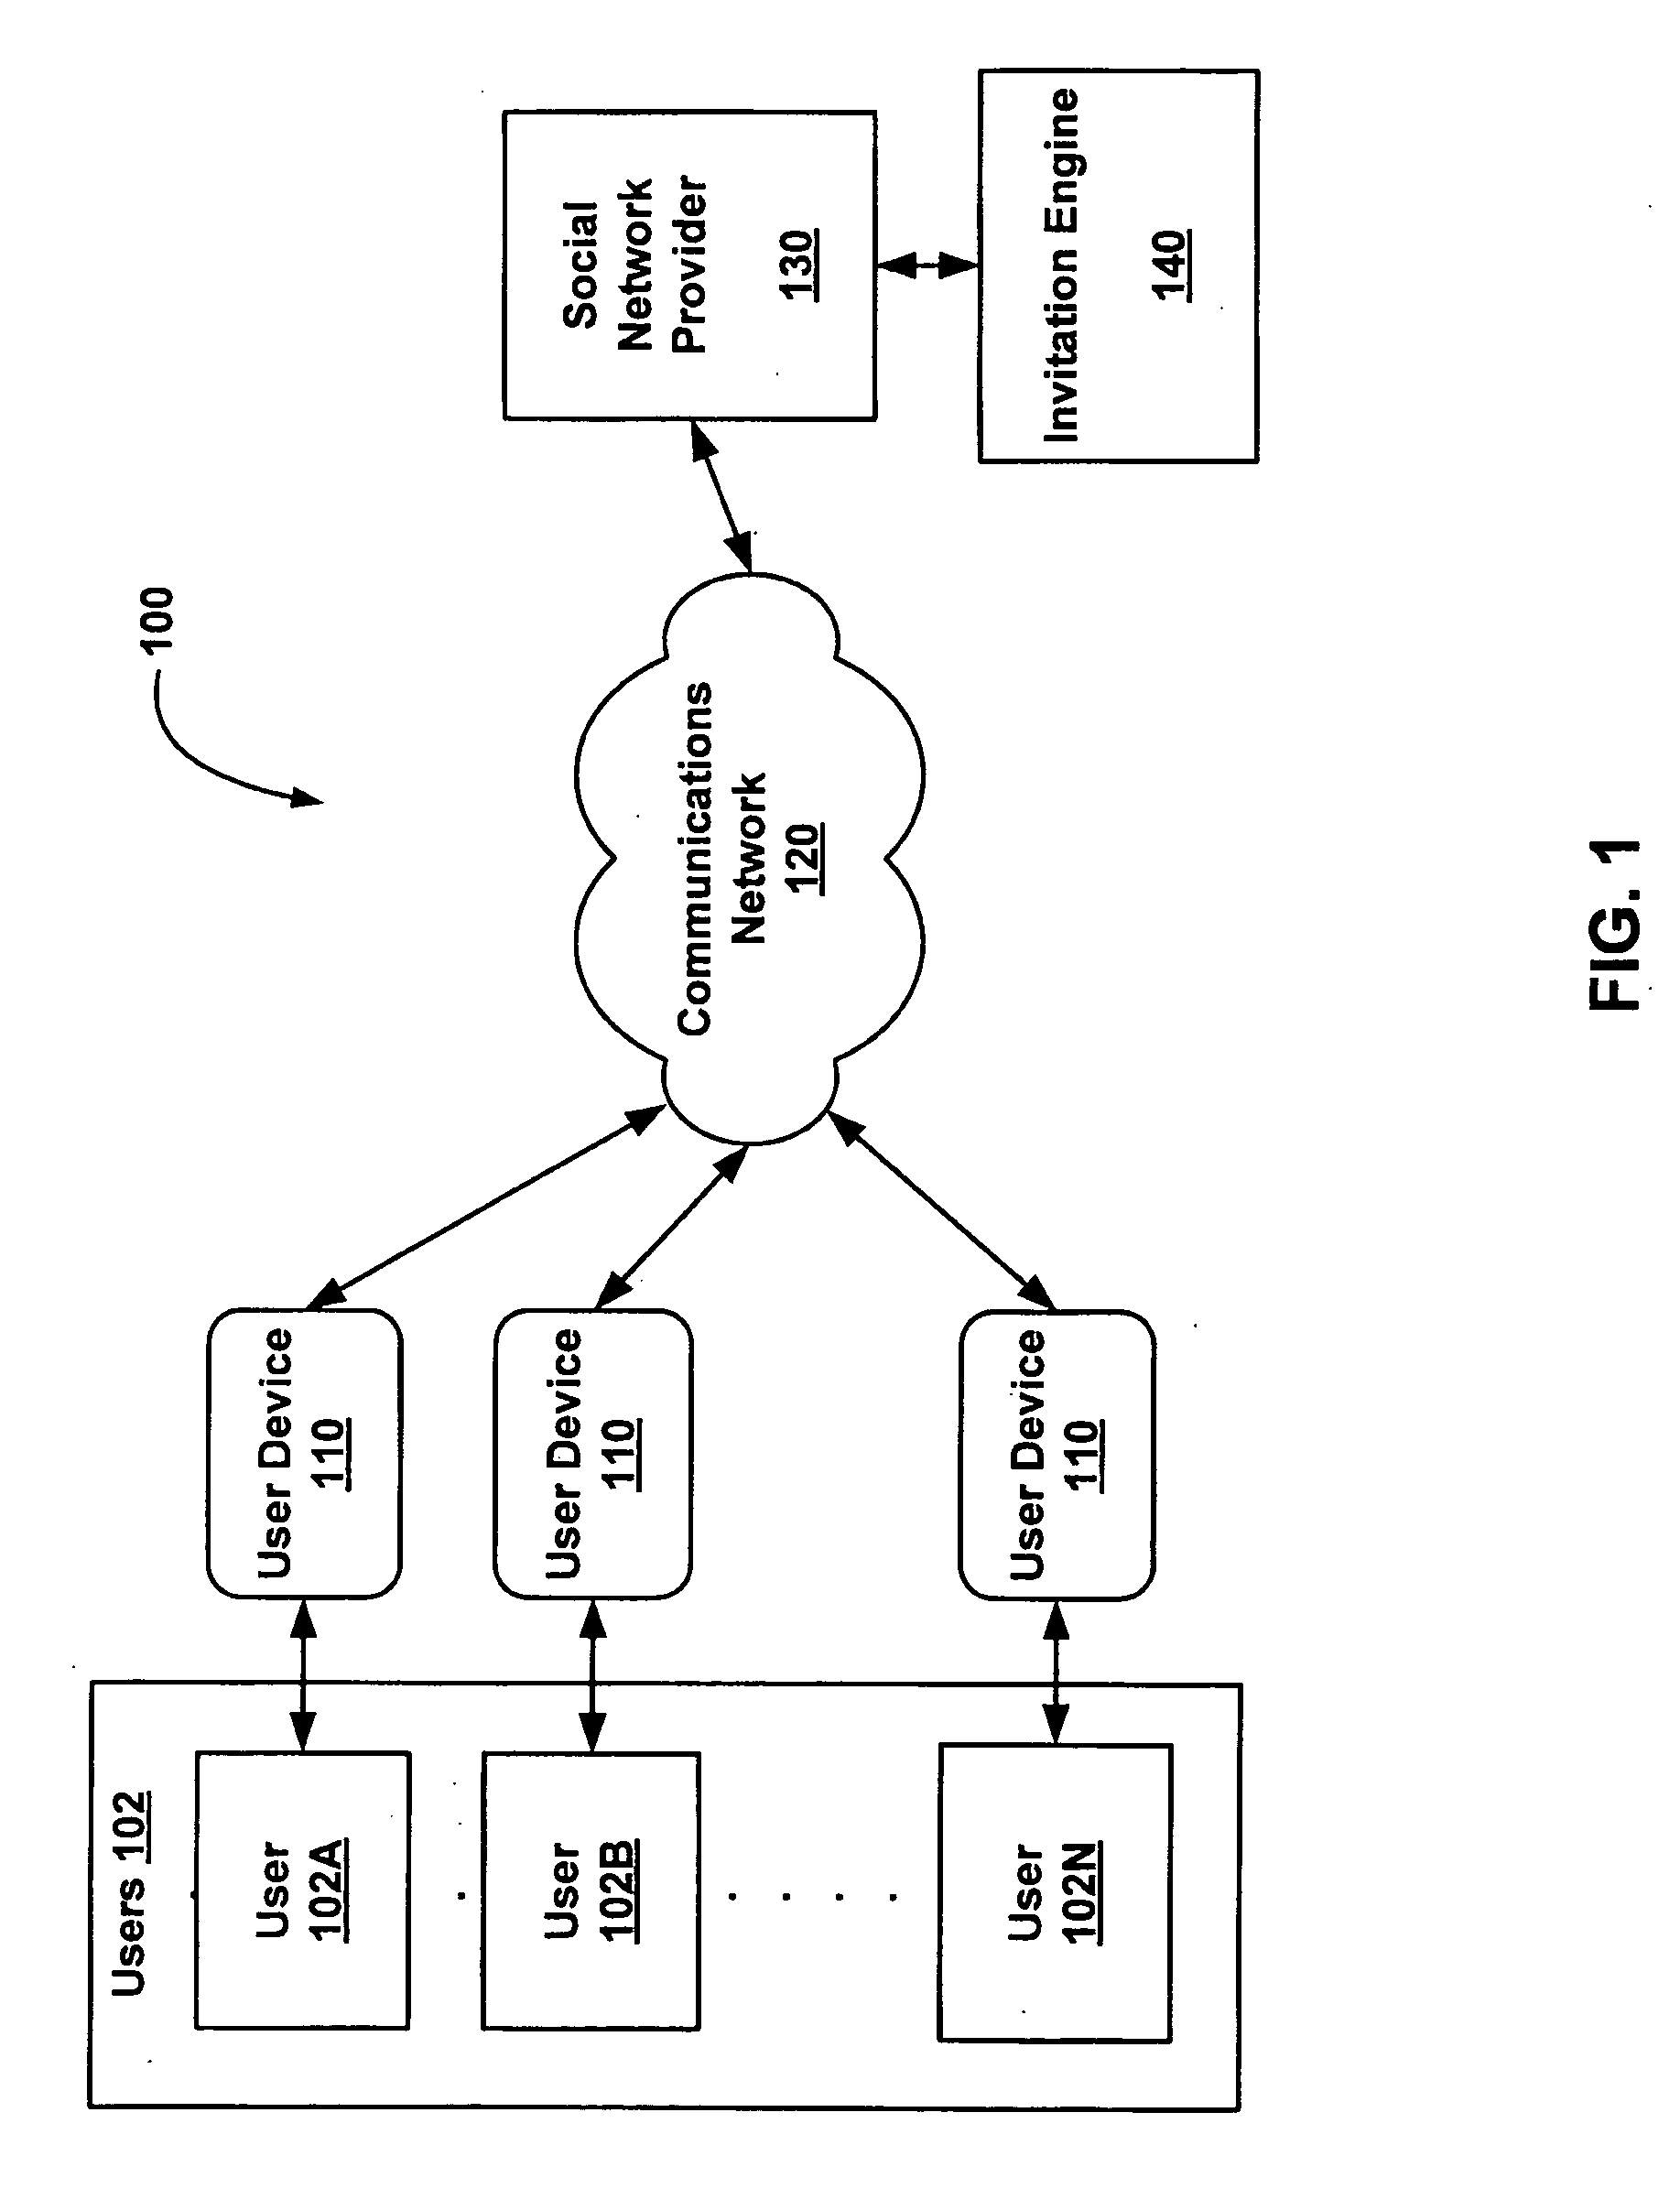 System and method for invitation targeting in a web-based social network